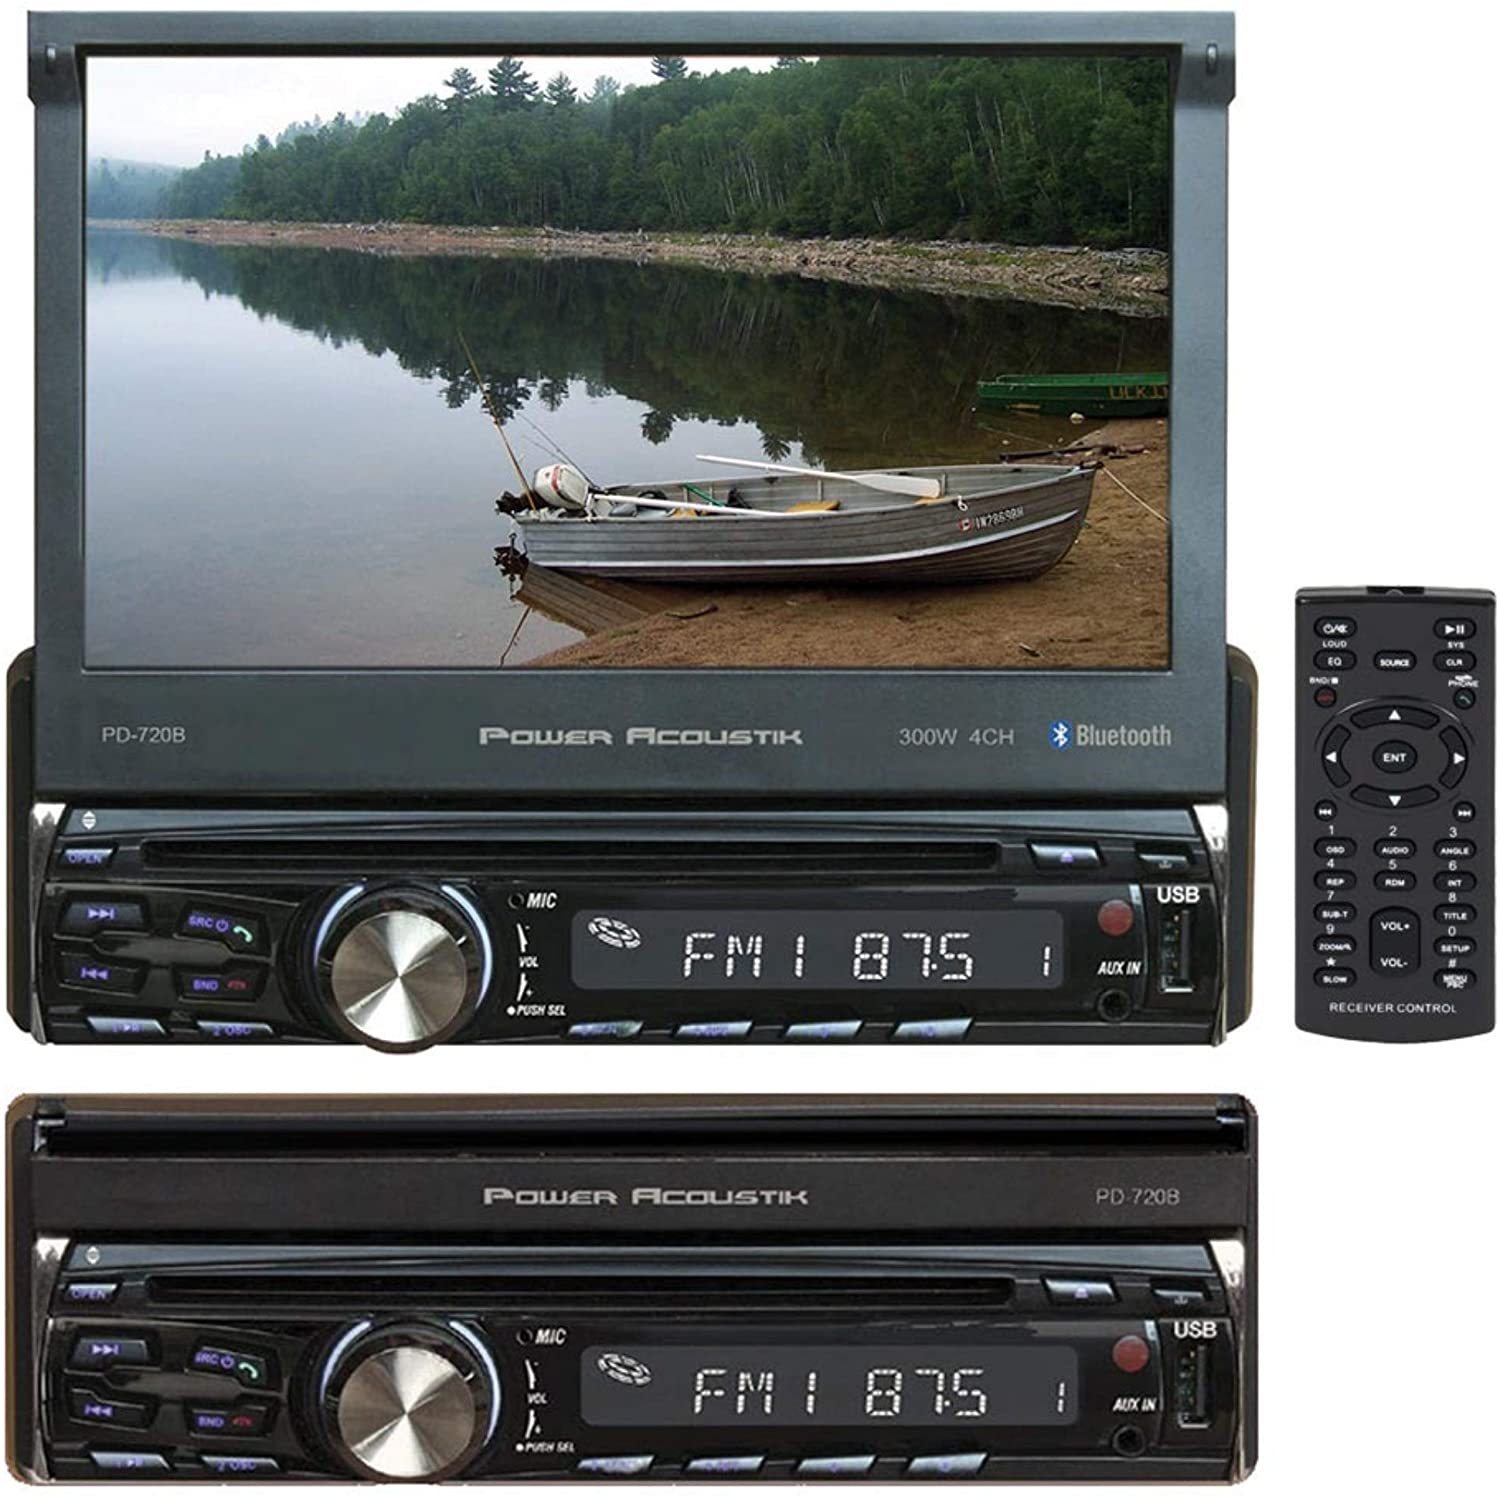 Power Acoustik PD-720B 1-DIN W/ 7-inch LCD Touch,DVD,CD/MP3 Car Stereo W/ BT